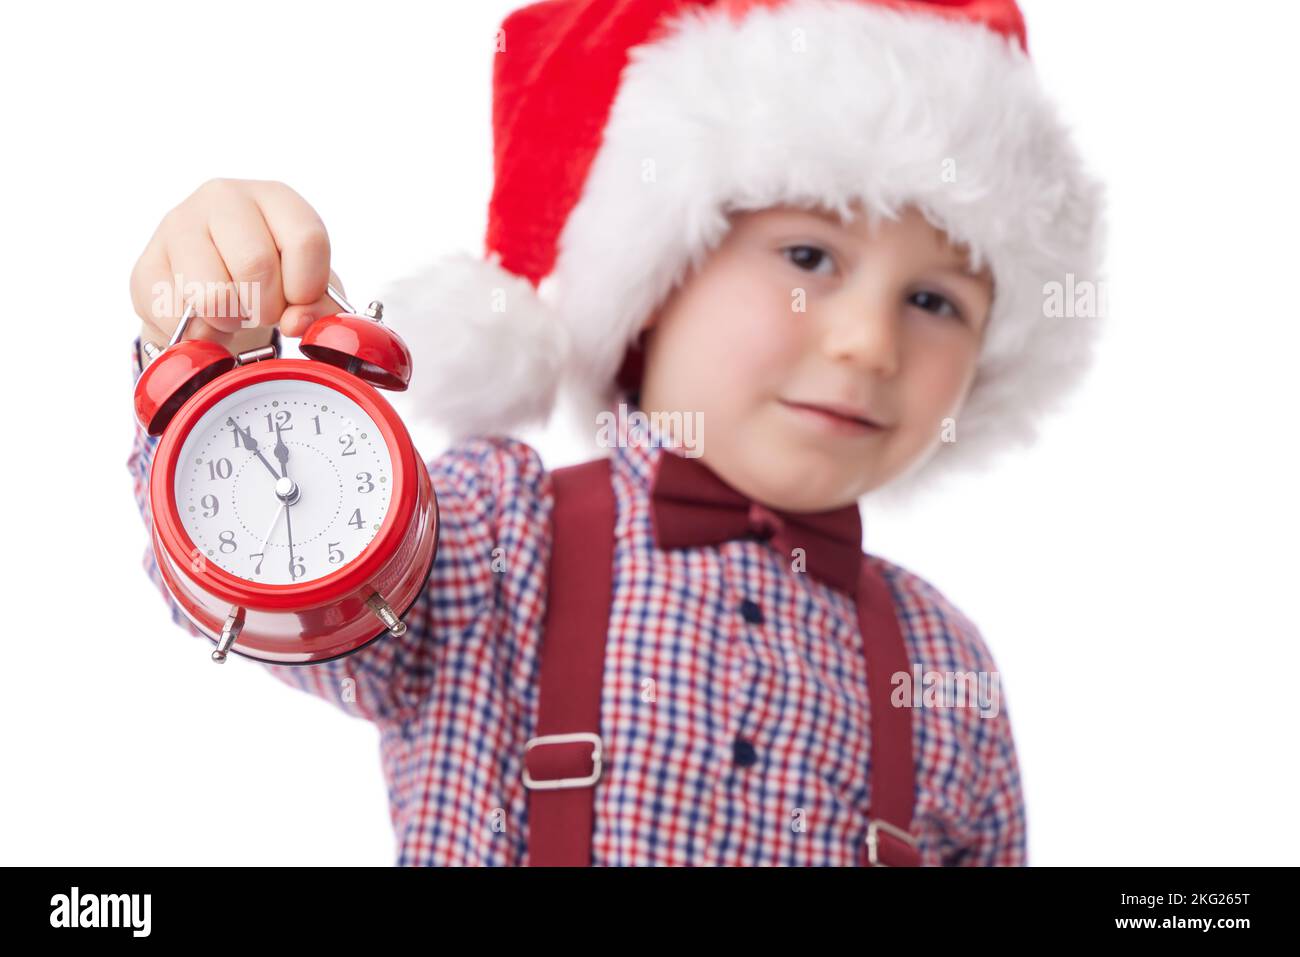 Christmas boy with red alarm clock, smiling little man in red Santa claus hat, tie and suspender posing on white background Stock Photo